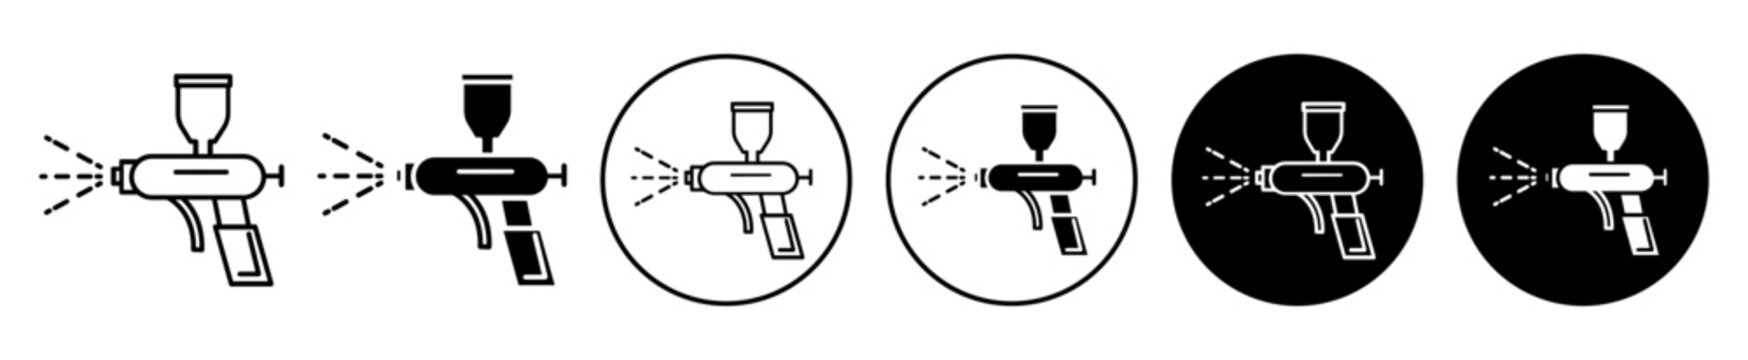 Spray gun icon set. car autobody paint Spray gun vector symbol in black filled and outlined style.